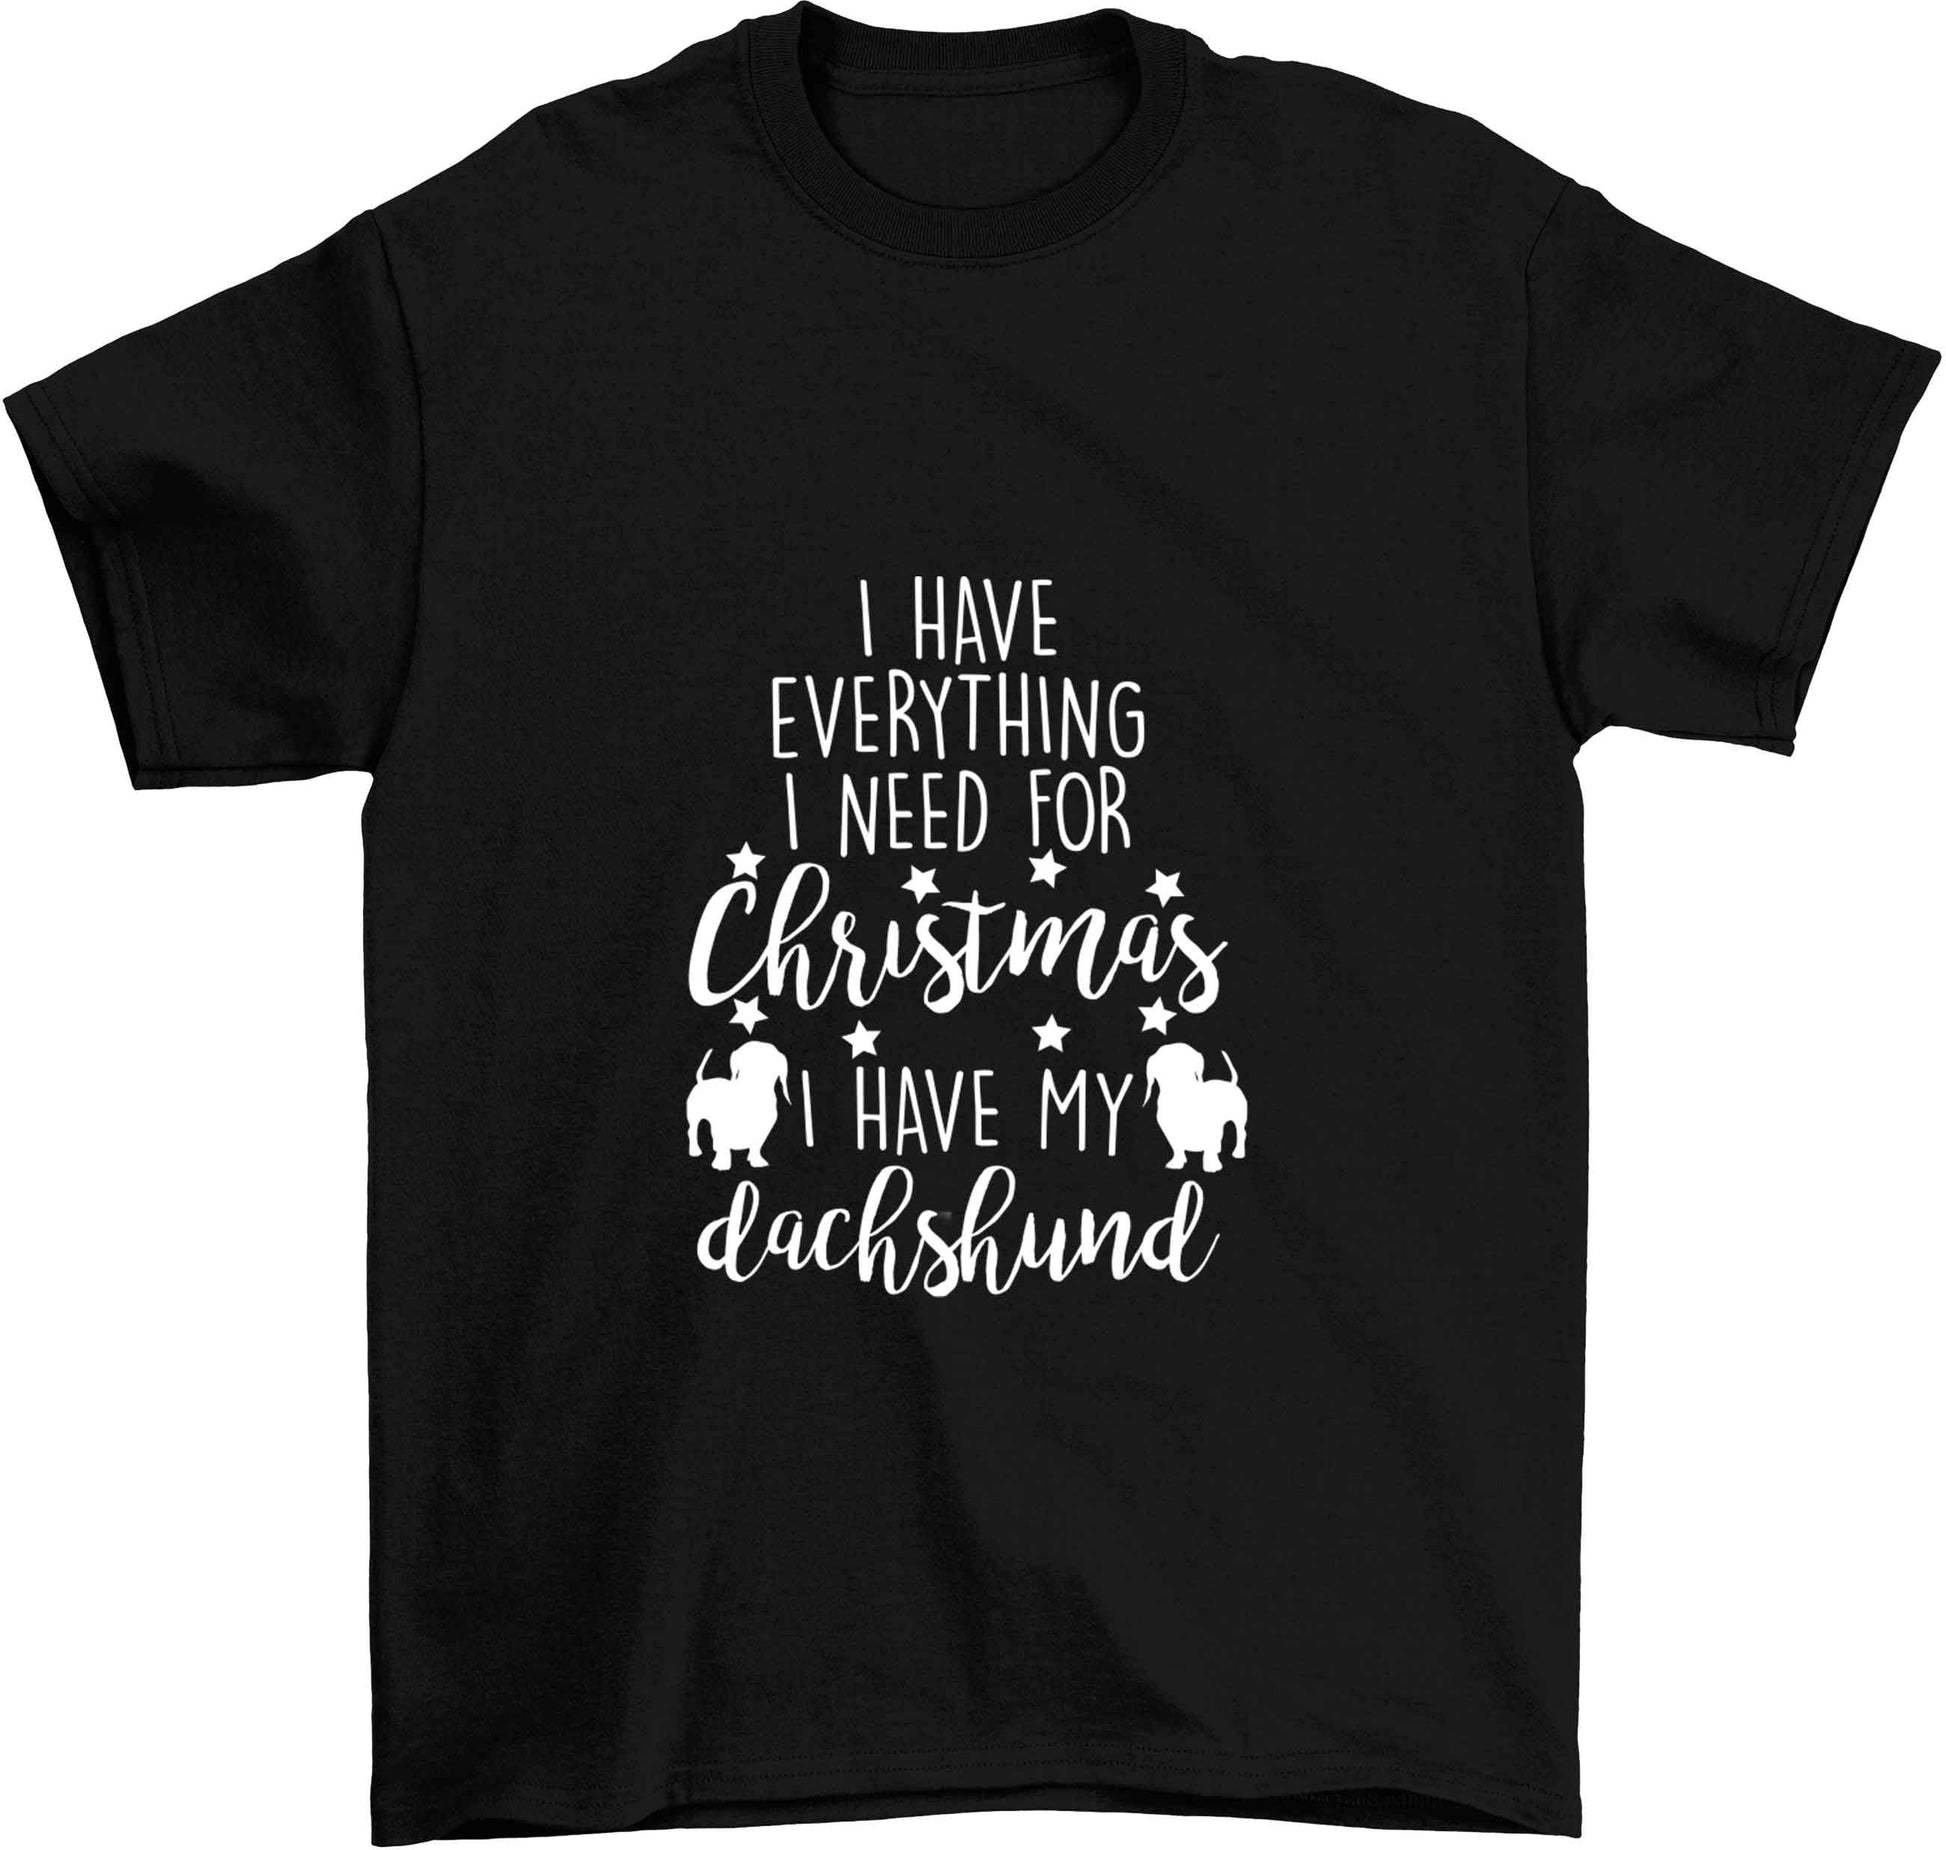 I have everything I need for Christmas I have my dachshund Children's black Tshirt 12-13 Years